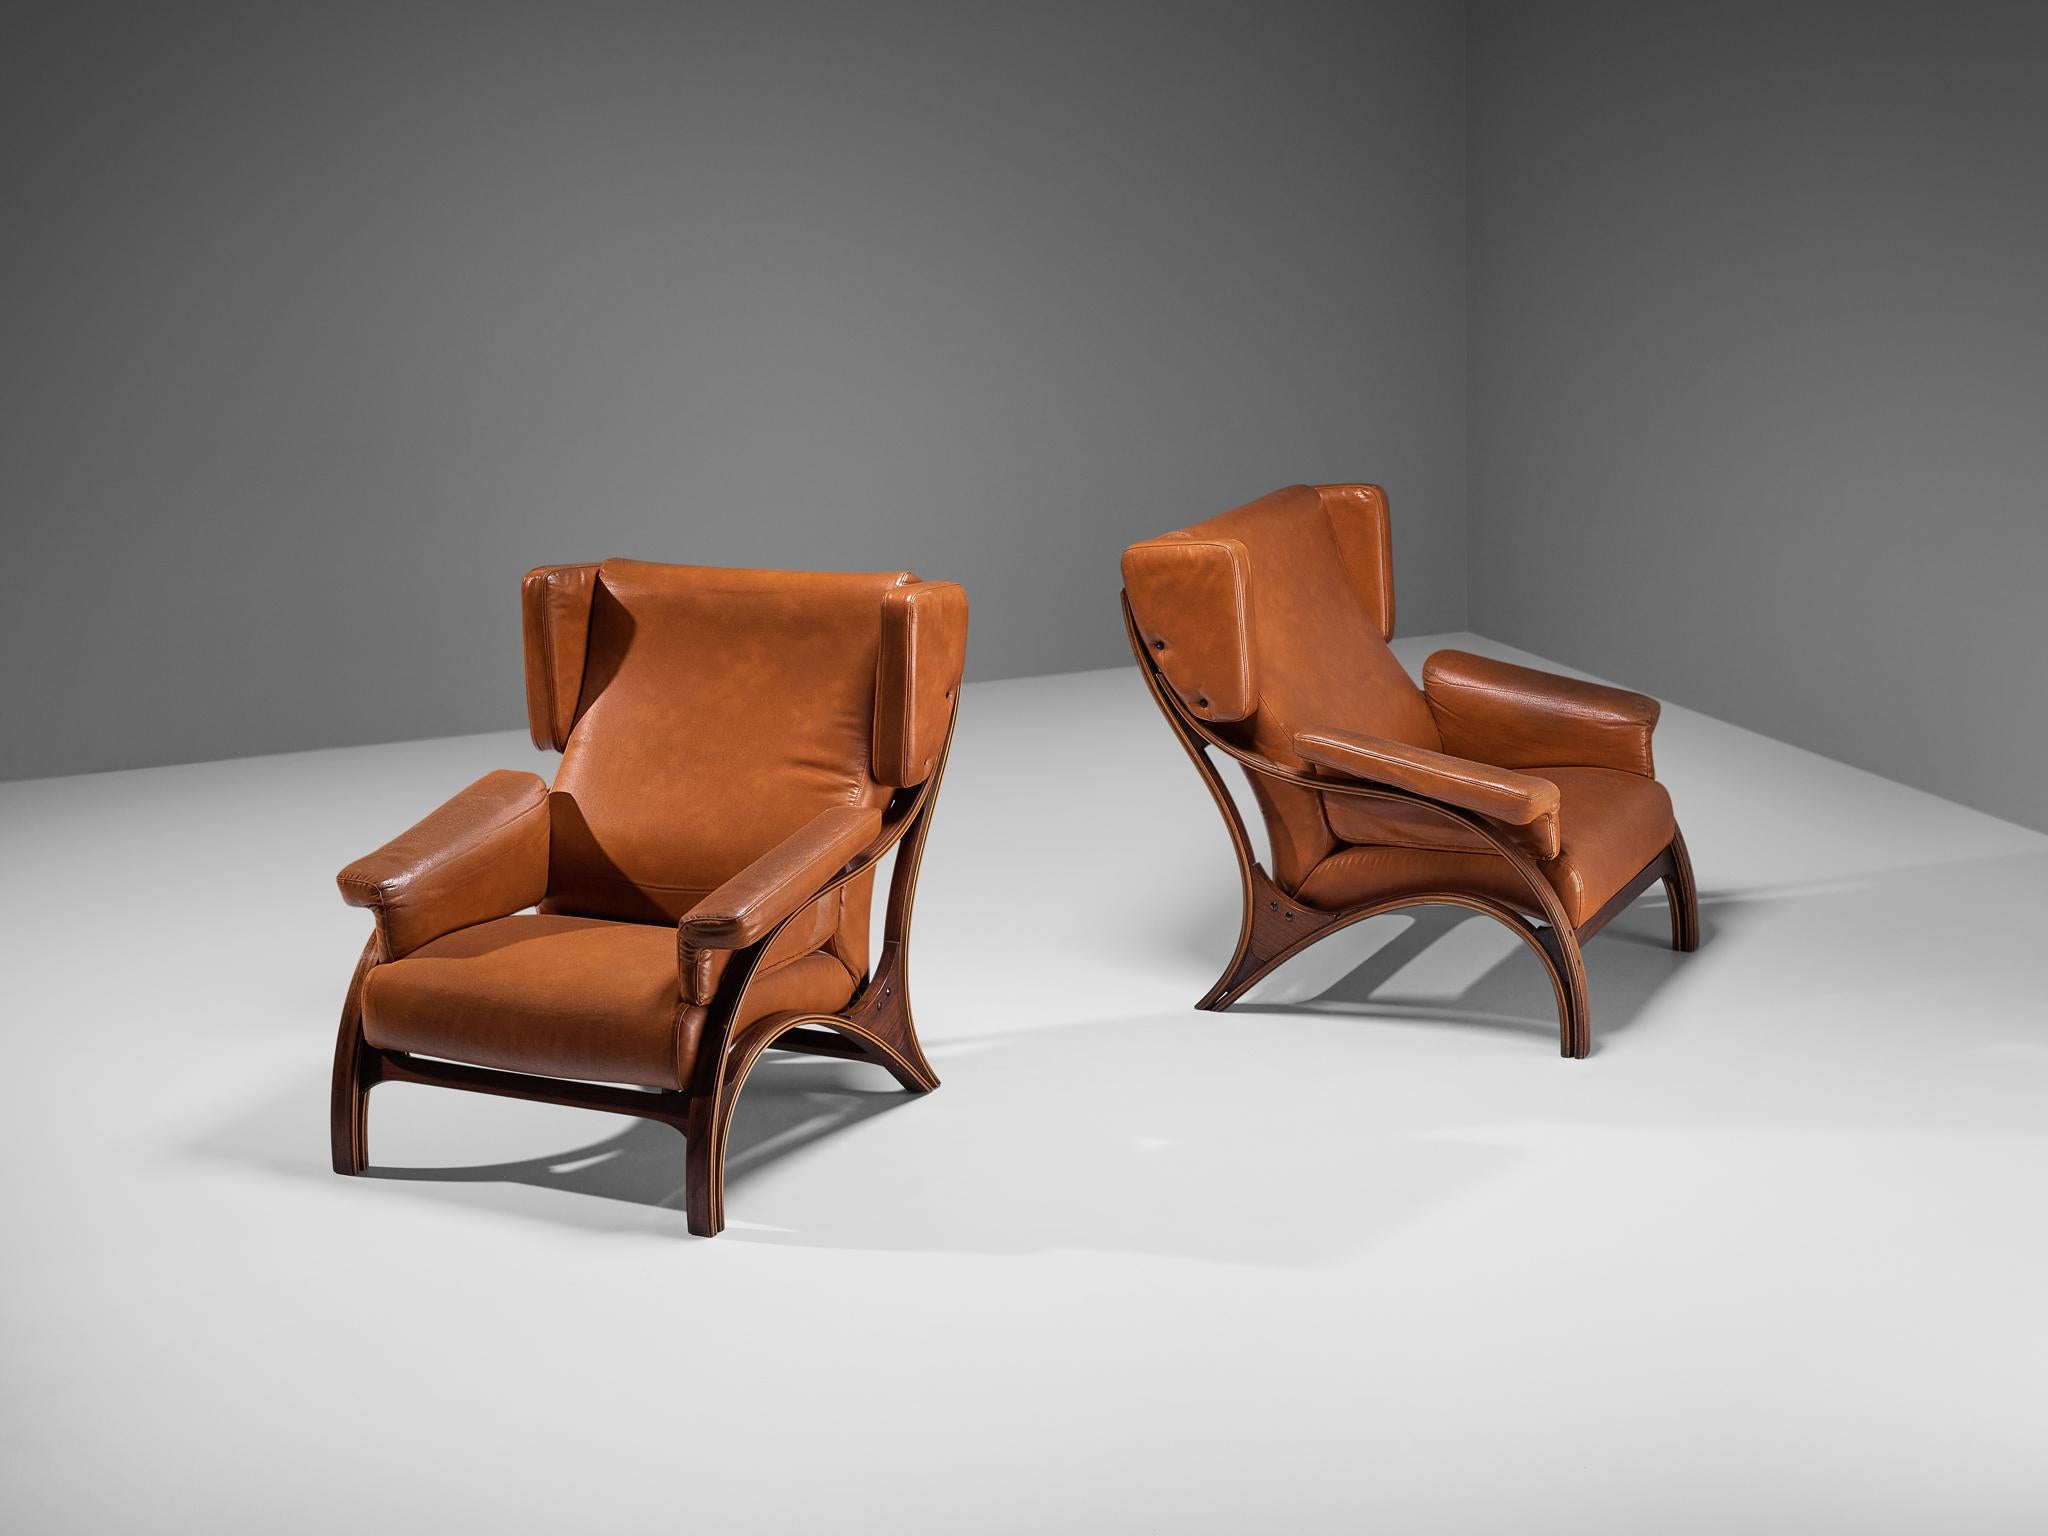 Giampiero Vitelli for Rossi di Albizzate, pair of 'Minore' lounge chairs, leather, plywood, Italy, 1961

A truly magnificent piece that scores highly on every design aspect: execution, material use, craftsmanship, and detail. This pair of 'Minore'